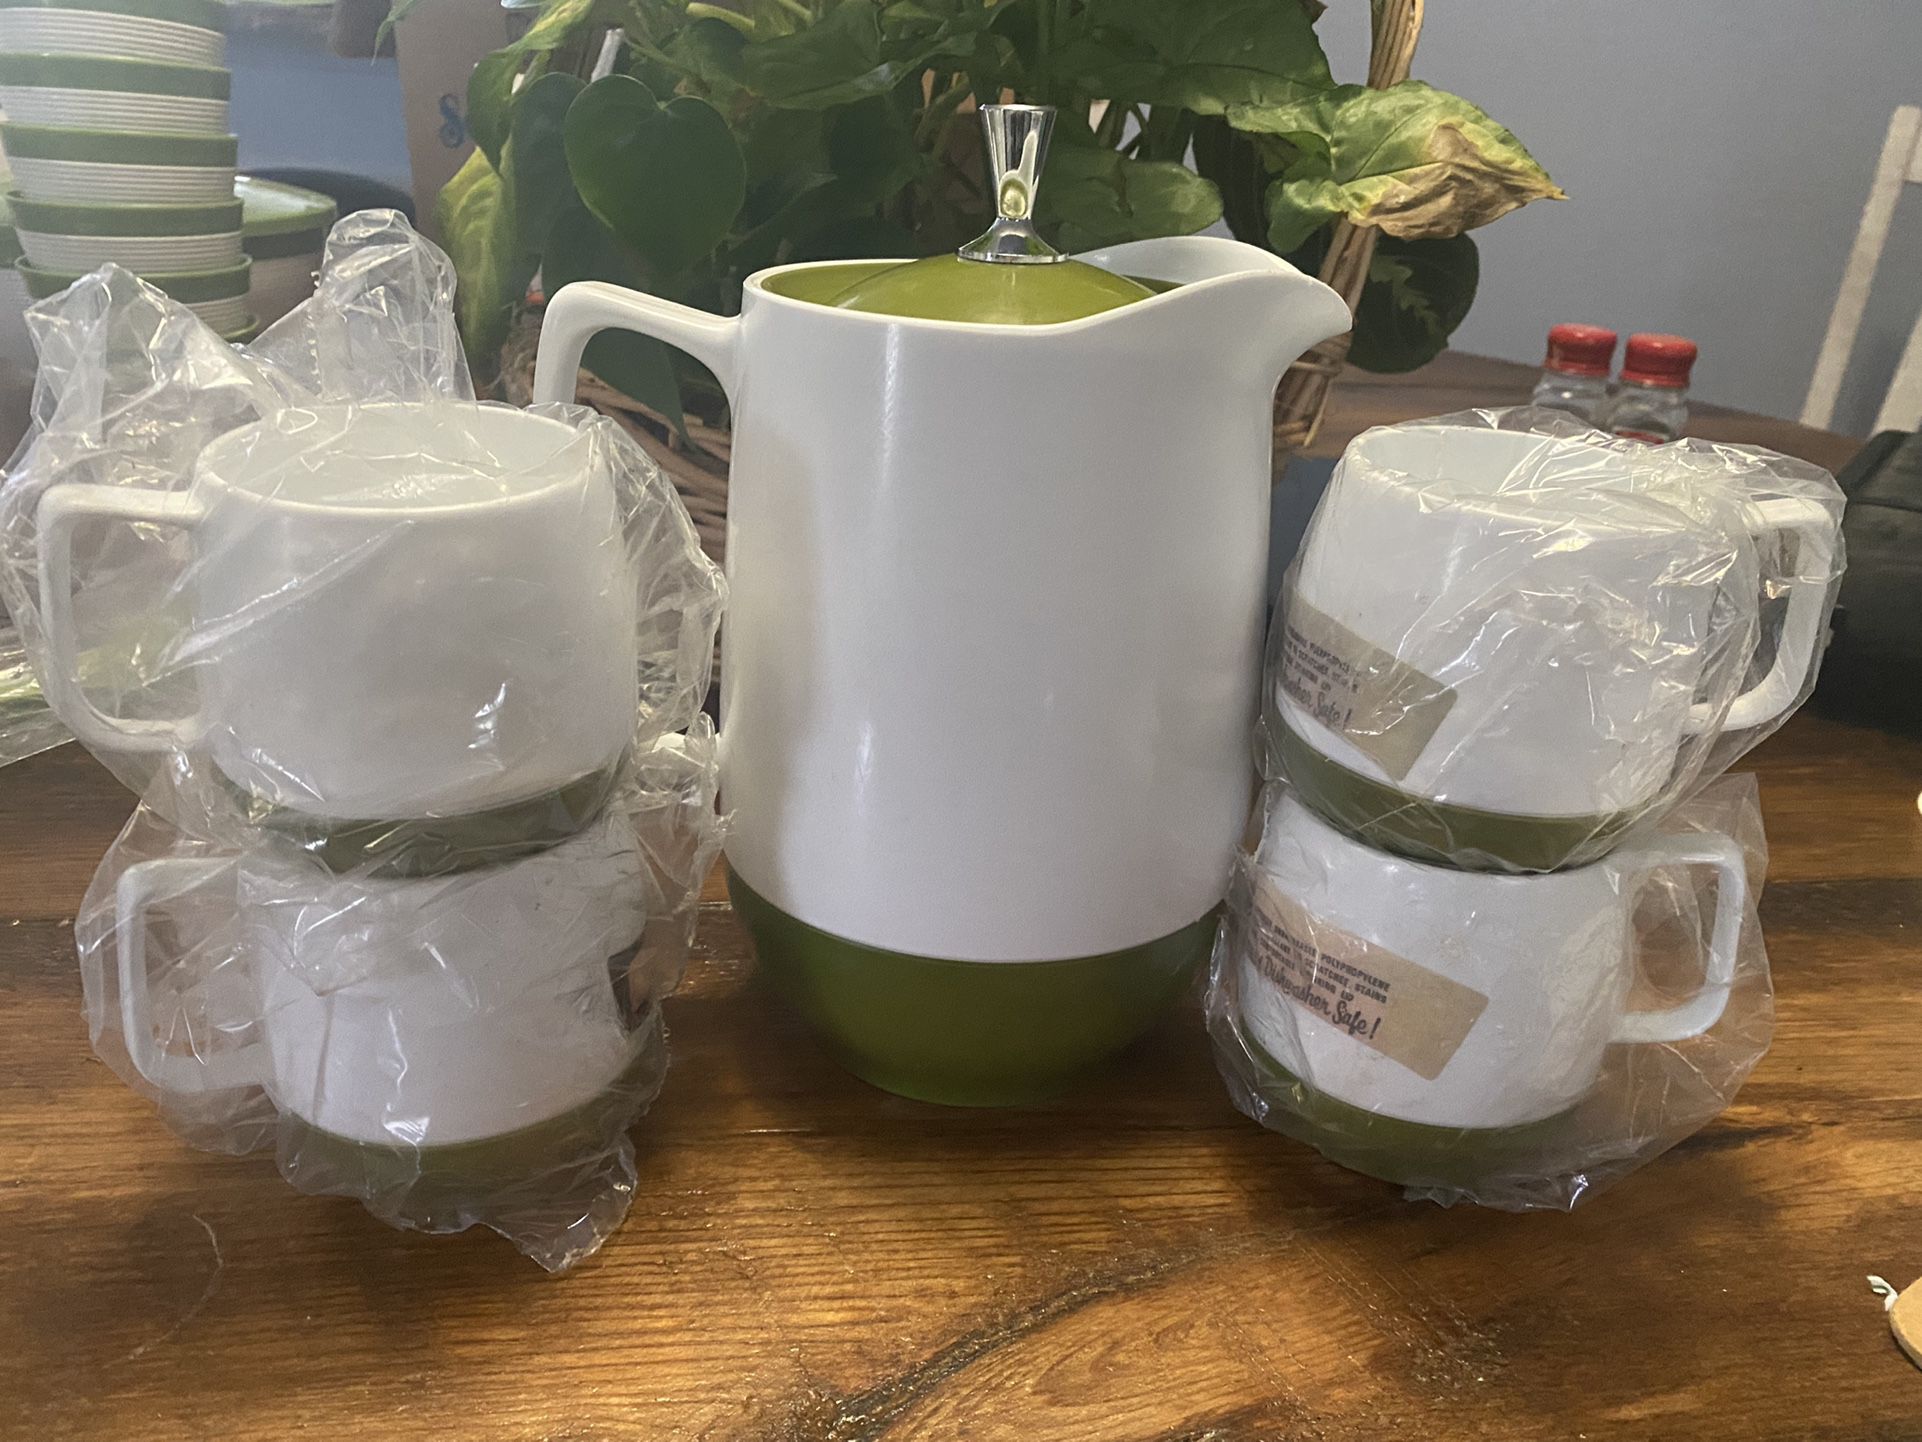  Vtg Thermos Retro Pitcher and 4 cups Insulated Ware King-Seeley USA 8" - avocado.  The 4 cups are still in unopened original packaging. The pitcher a